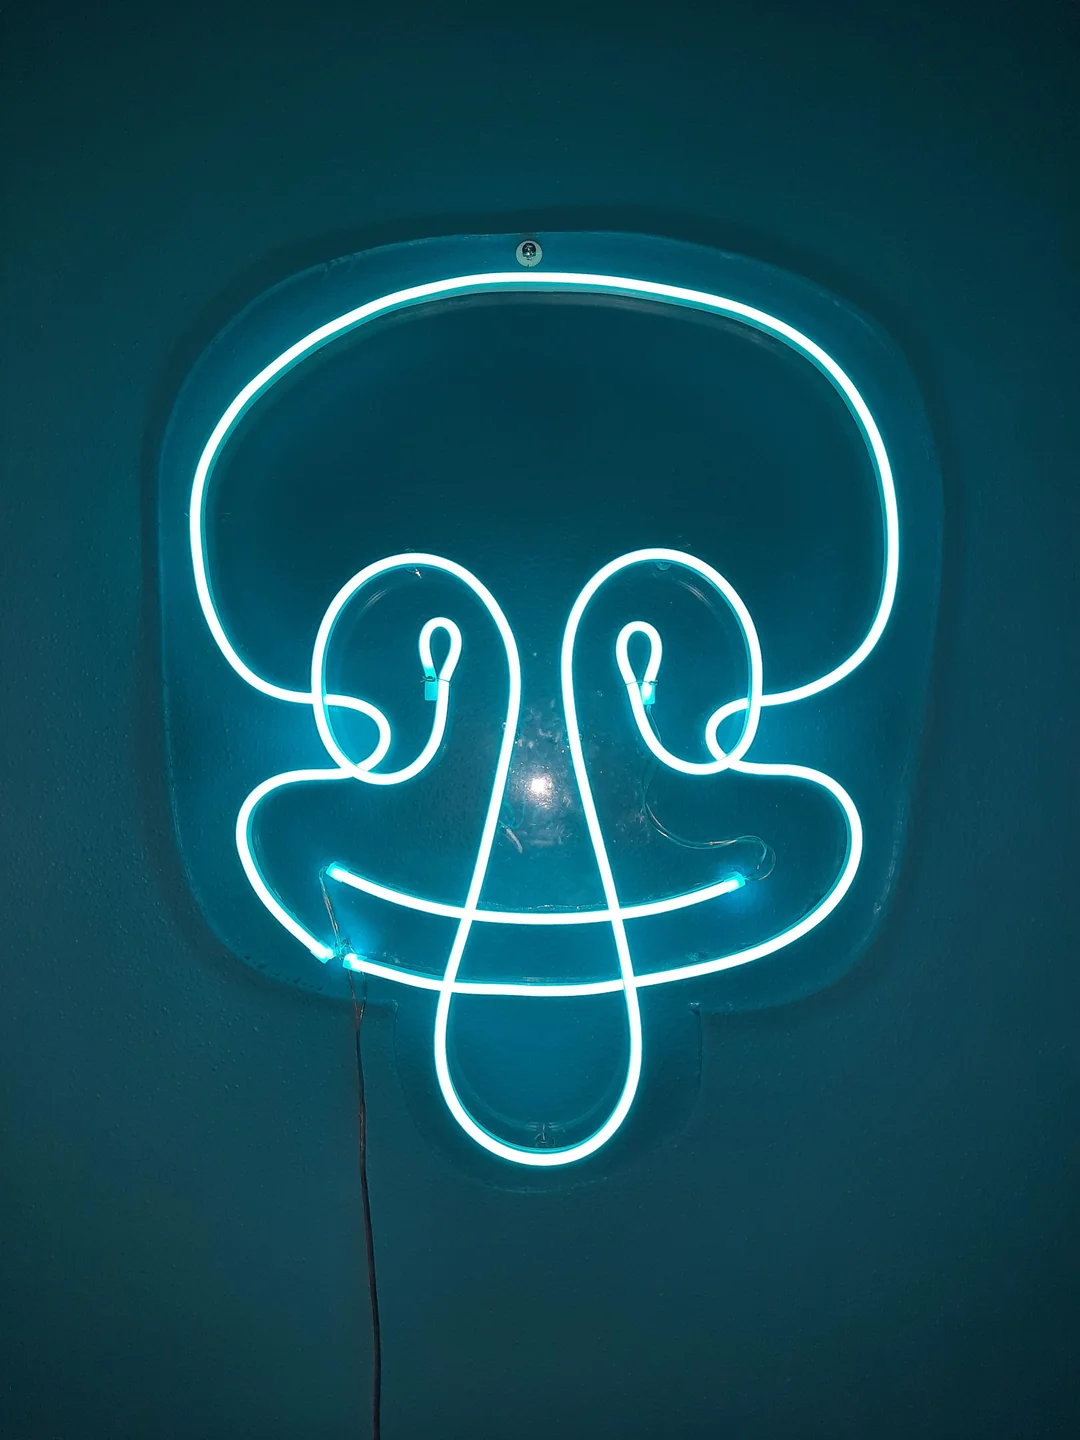 Squidward Tentacles Neon Sign for Wall Decor, Neon Light Gift